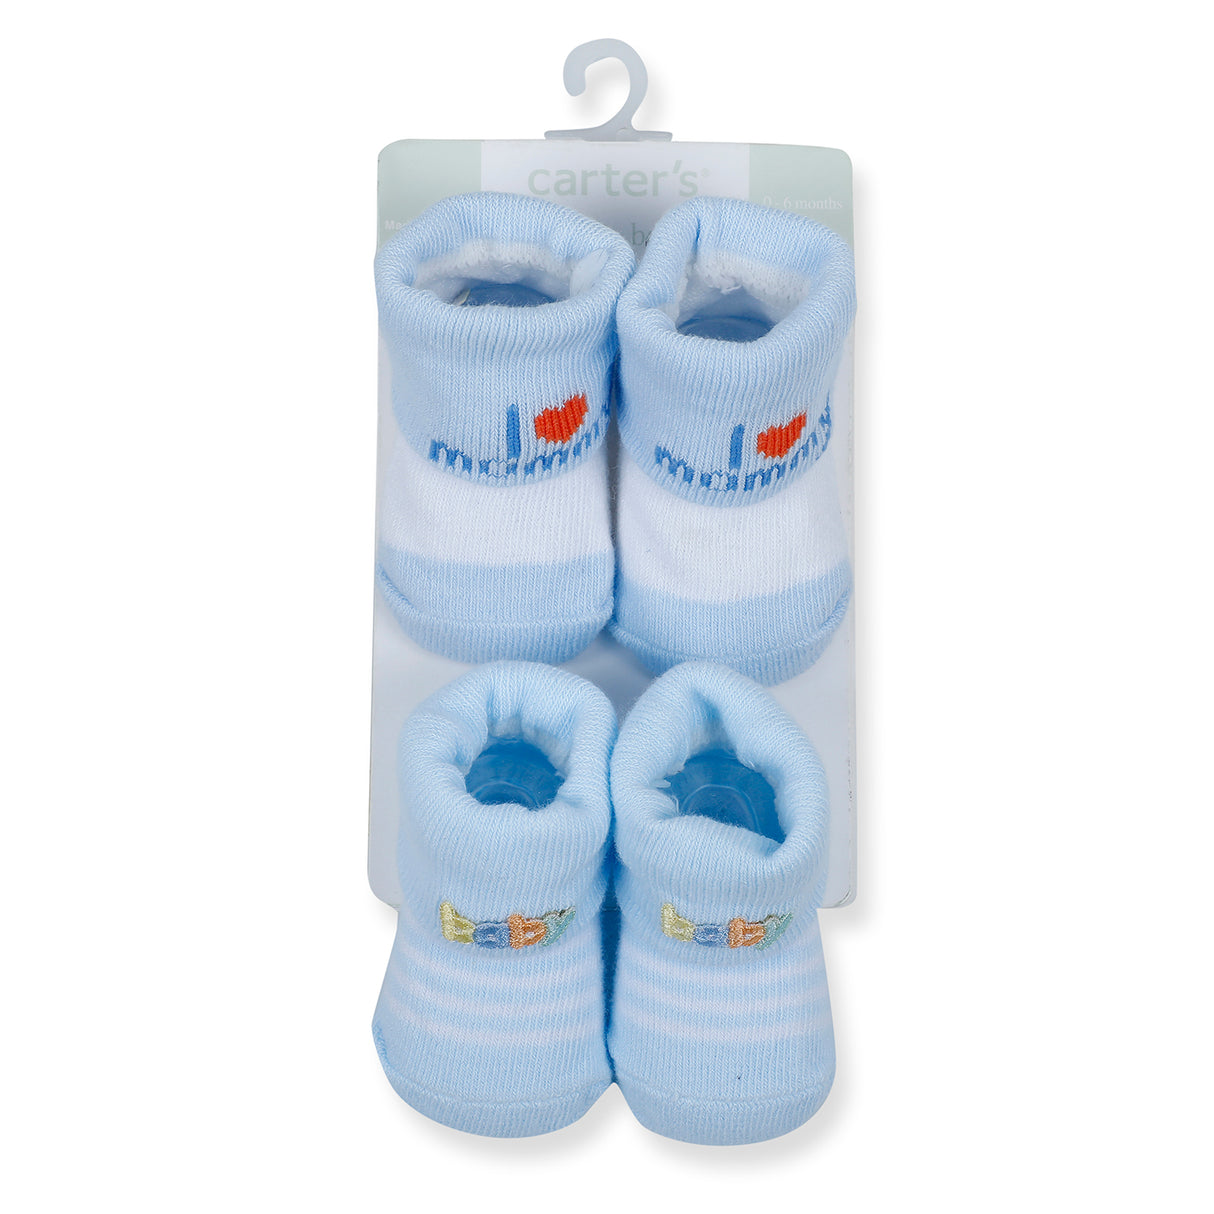 Newborn Breathable Cozy Infant Pack Of 2 Cotton Socks